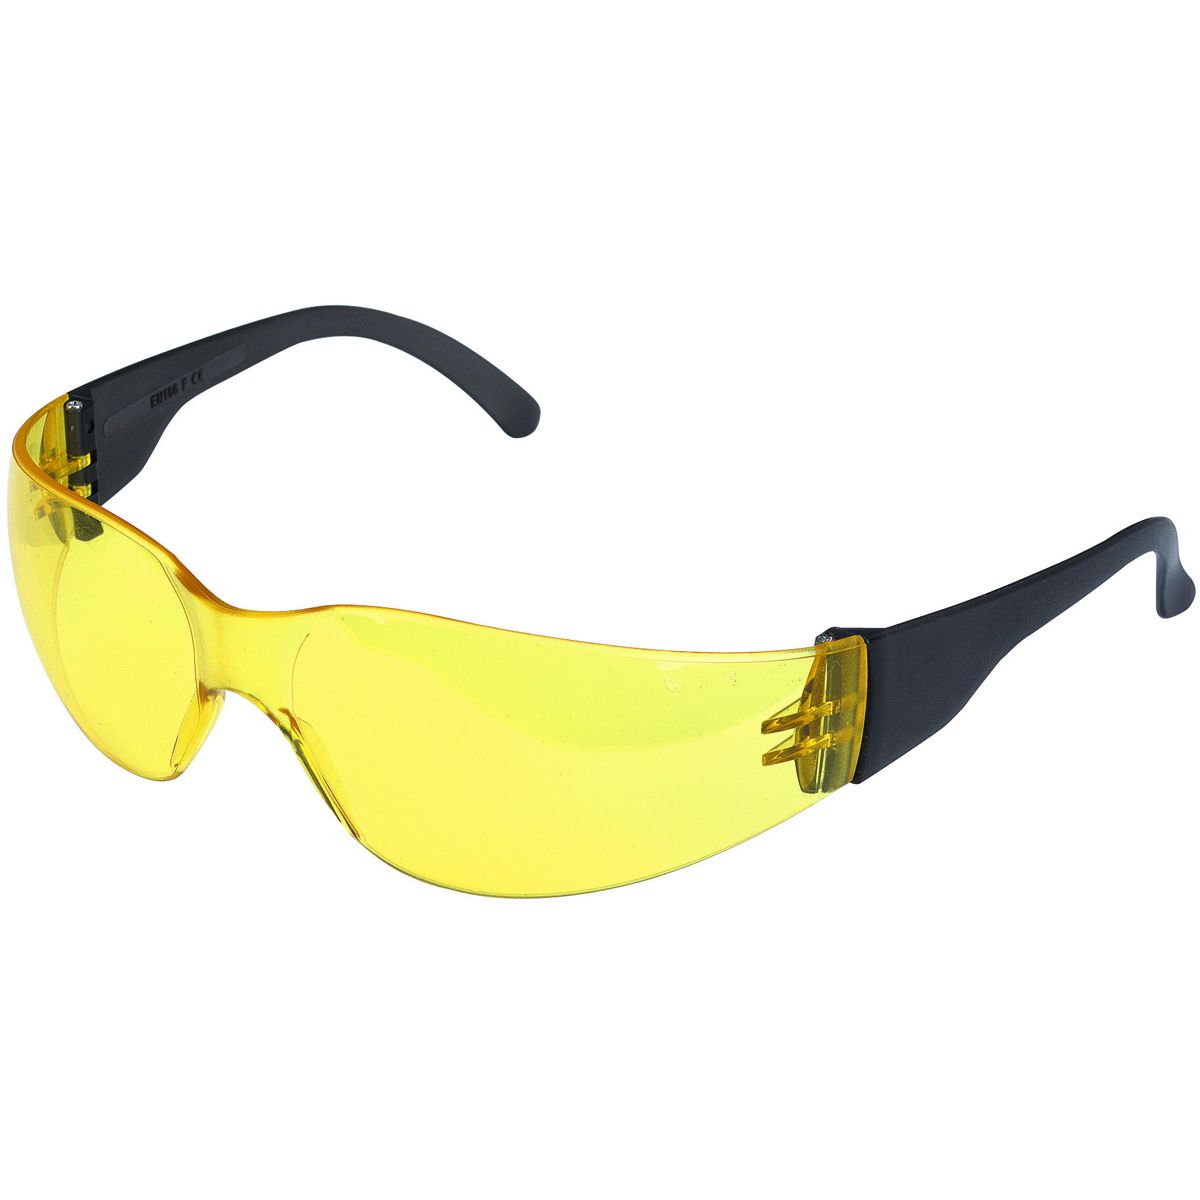 WESTERN SAFETY Tinted Yellow Lens Safety Glasses